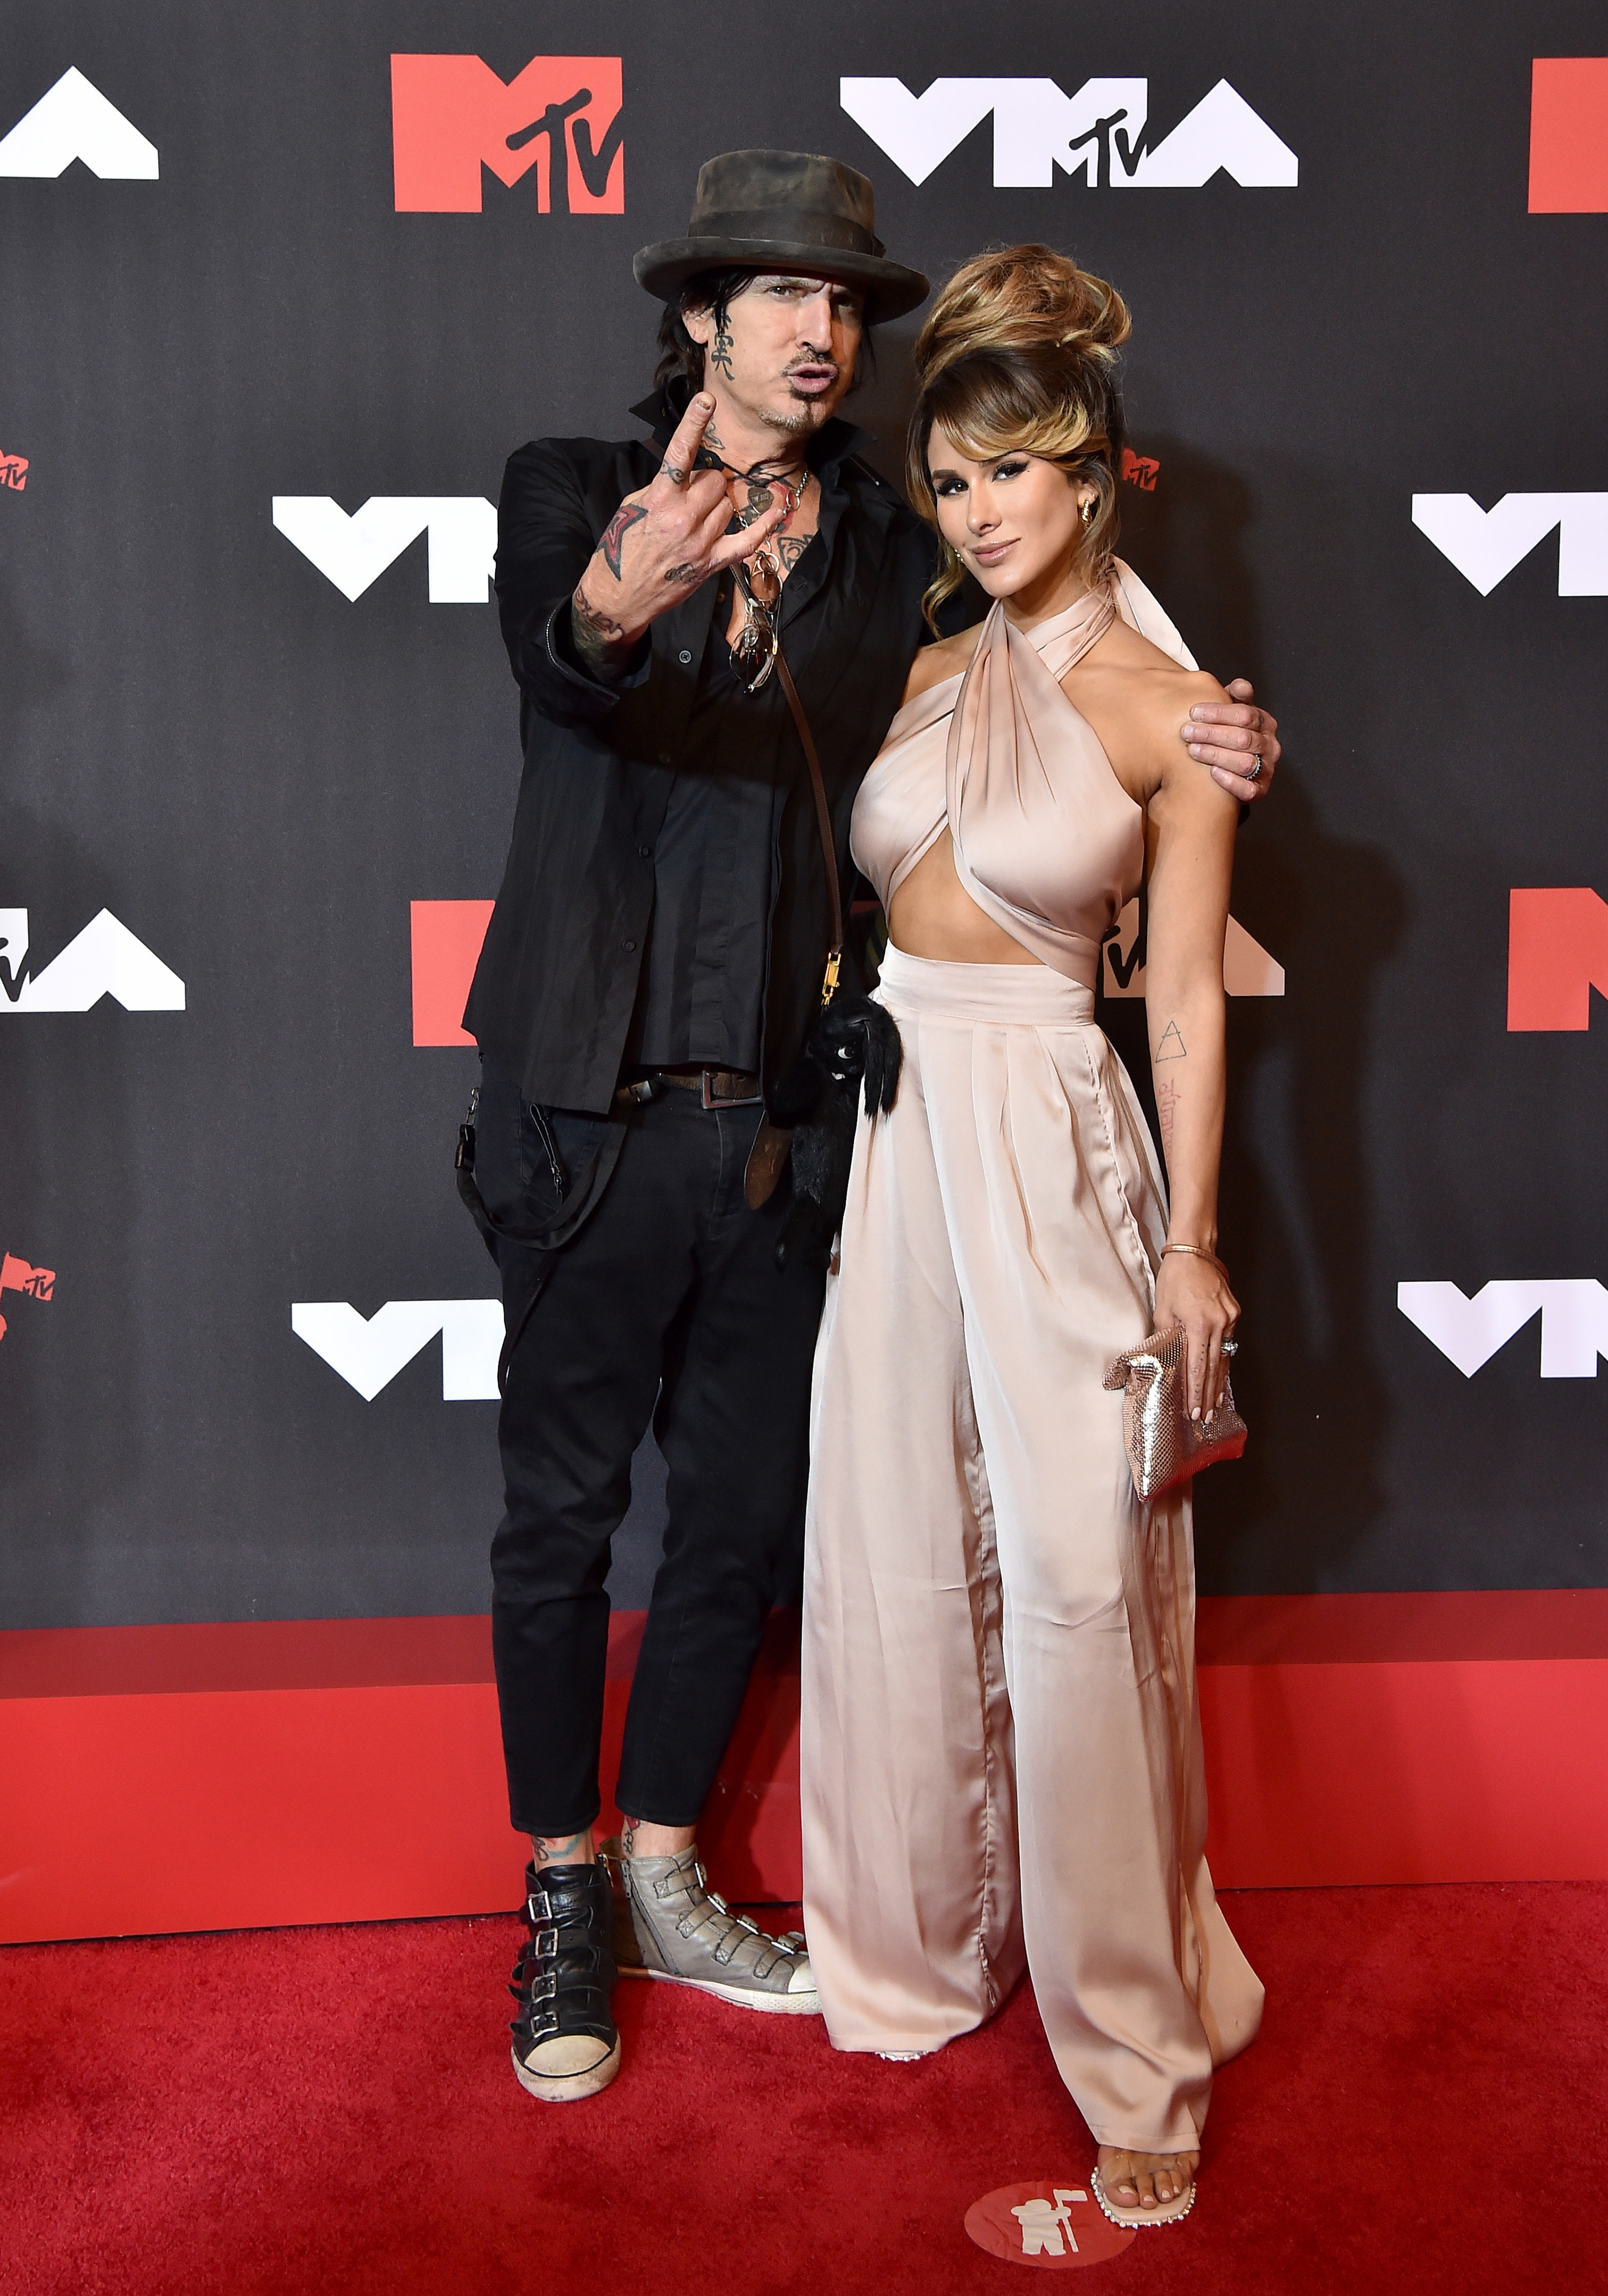 Brittany Furlan and Tommy Lee on the red carpet